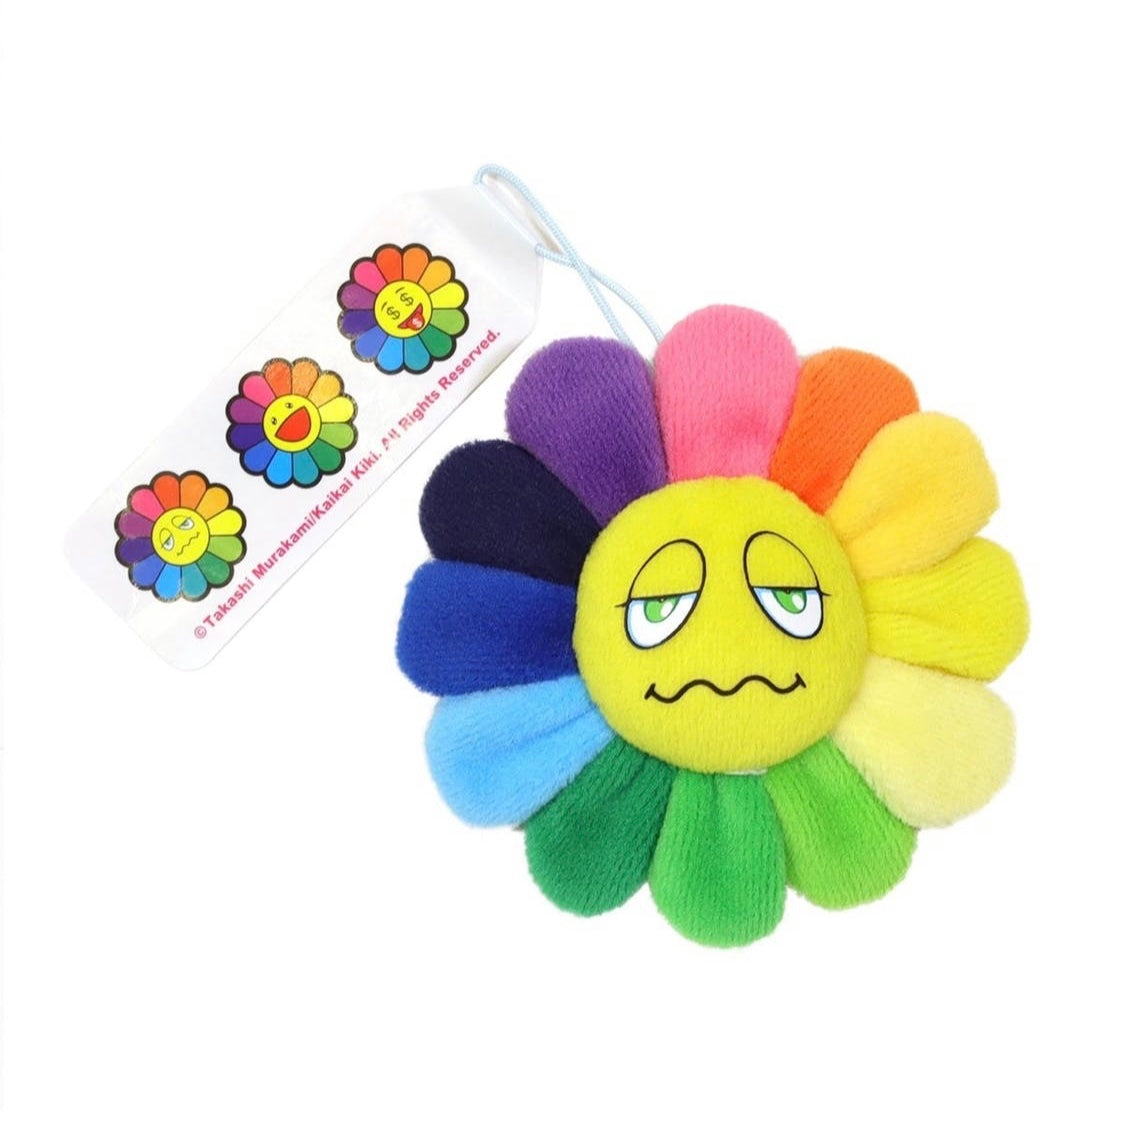 Takashi Murakami Flower Emoji Keychain (Sour) - Shop Streetwear, Sneakers, Slippers and Gifts online | Malaysia - The Factory KL